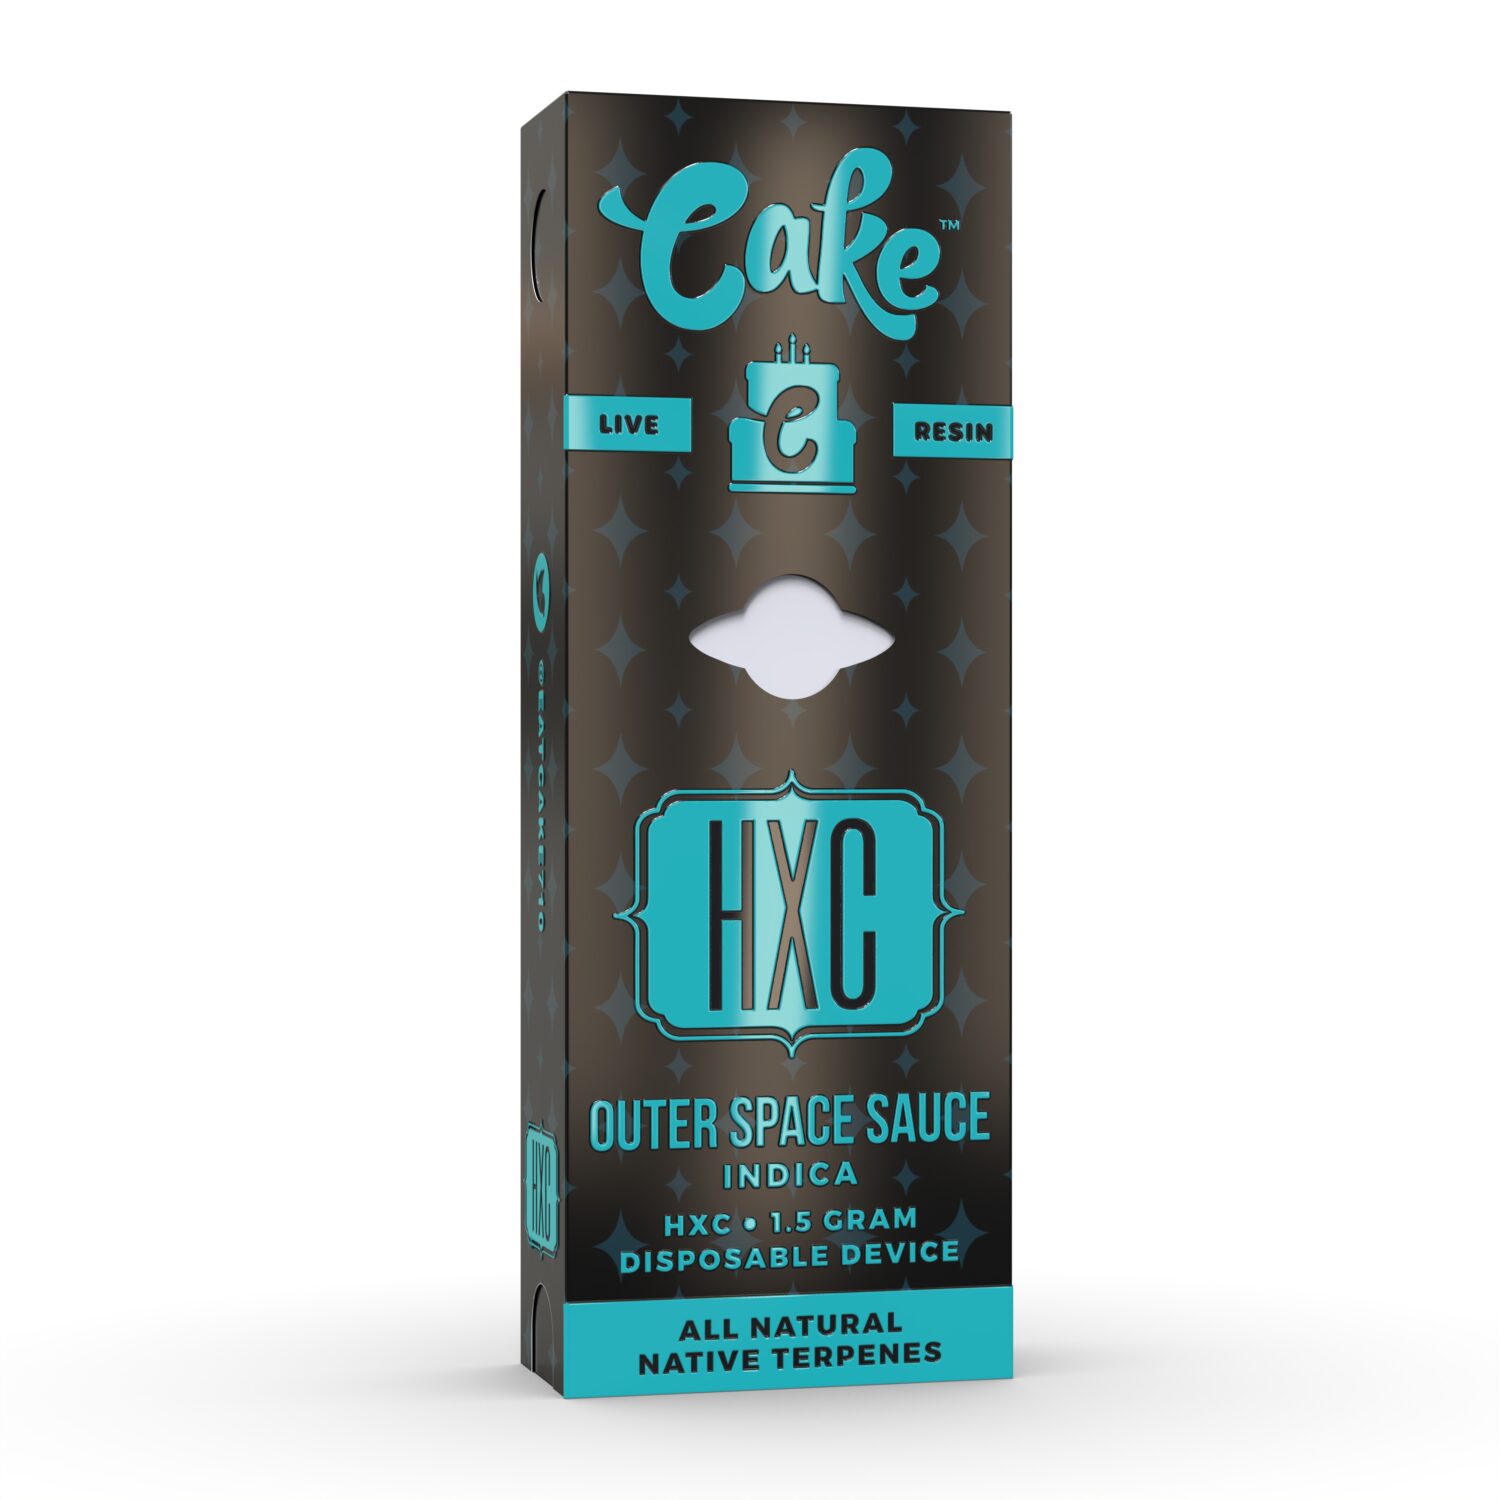 Cake-HXC-Live-Resin-Disposable-Outer-Space-sauce-scaled-1.jpg